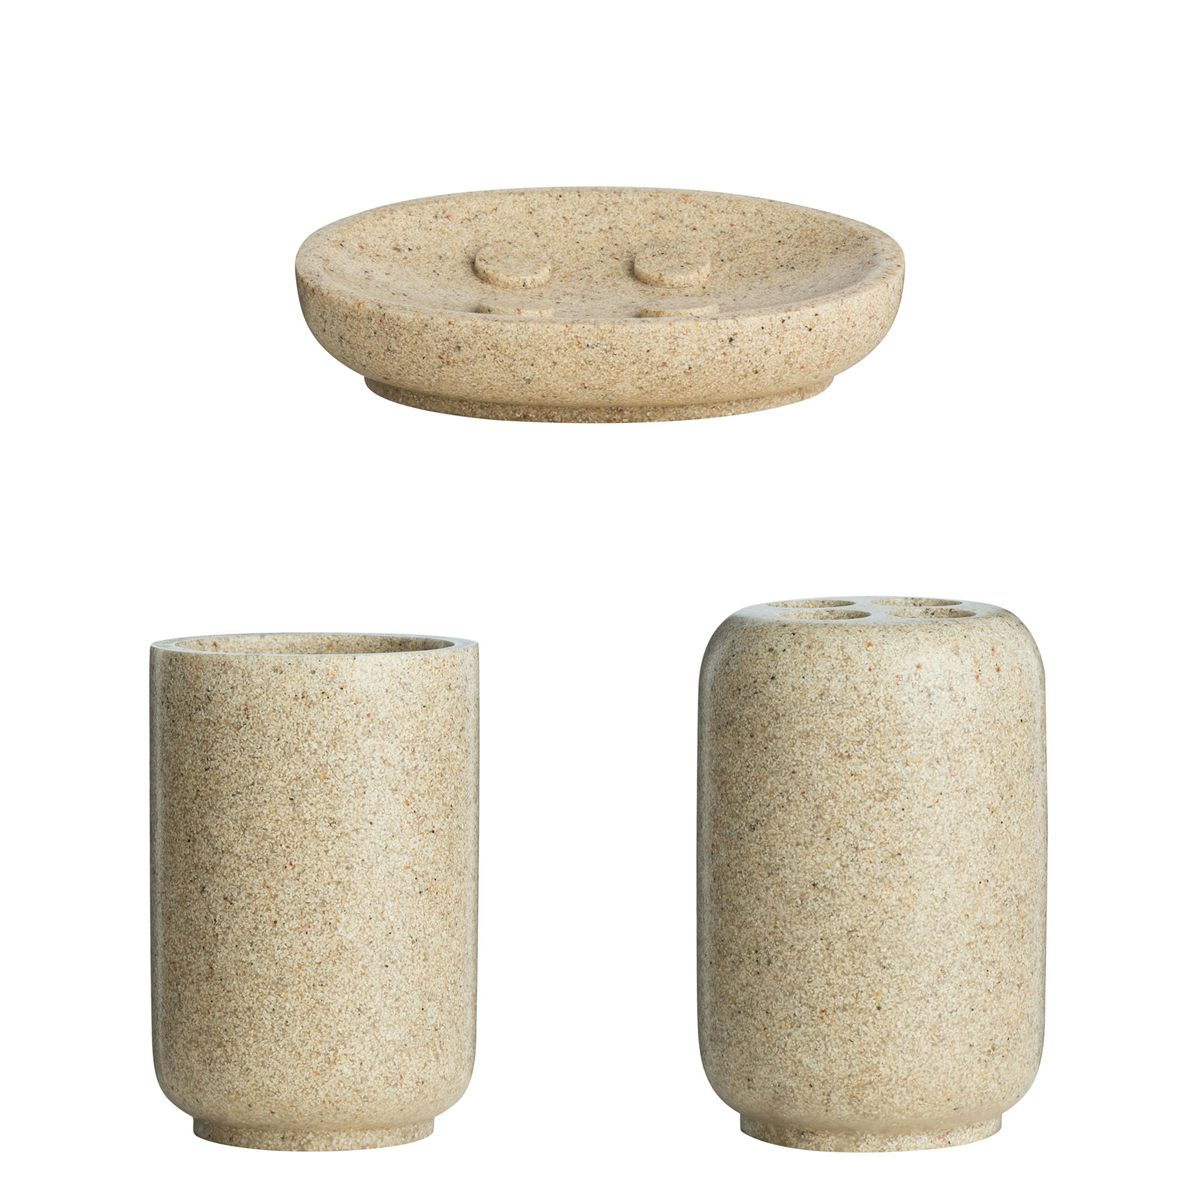 Accents Mineral Stone 3 piece bathroom accessory set